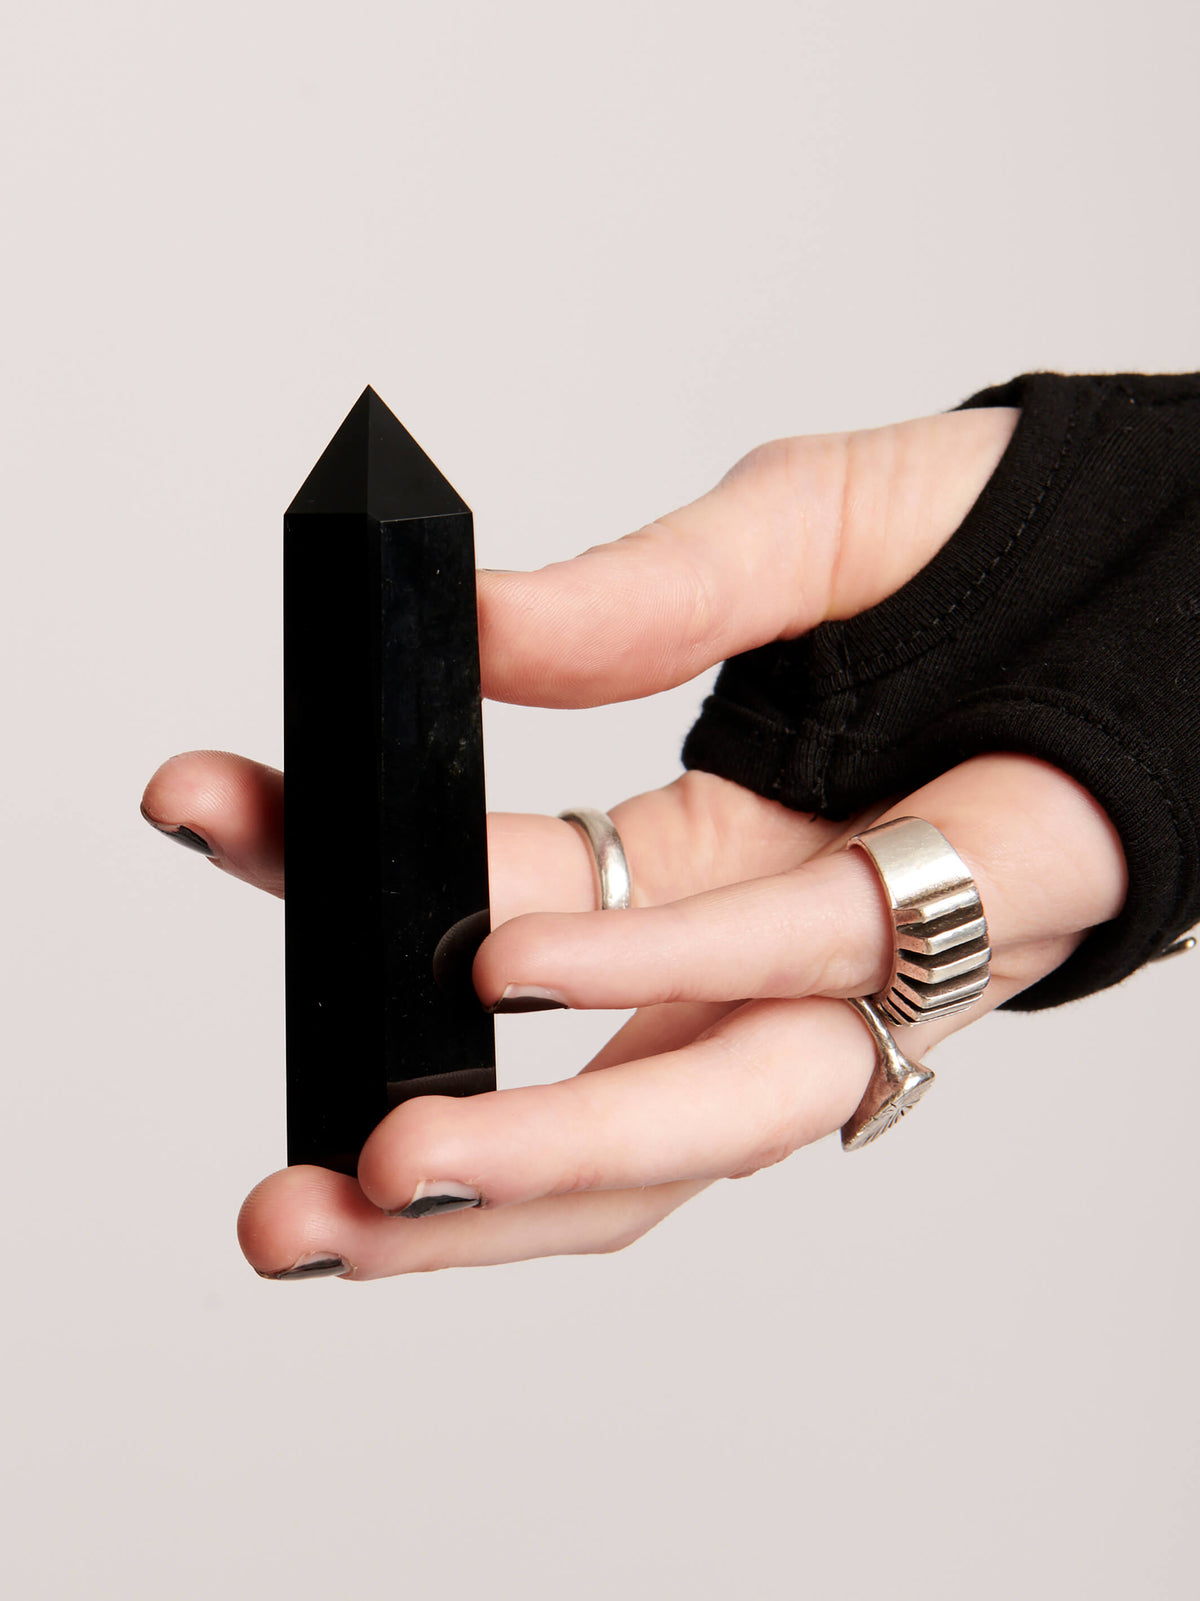 Black Obsidian crystal point. Smooth polished black stone with pointed tip.